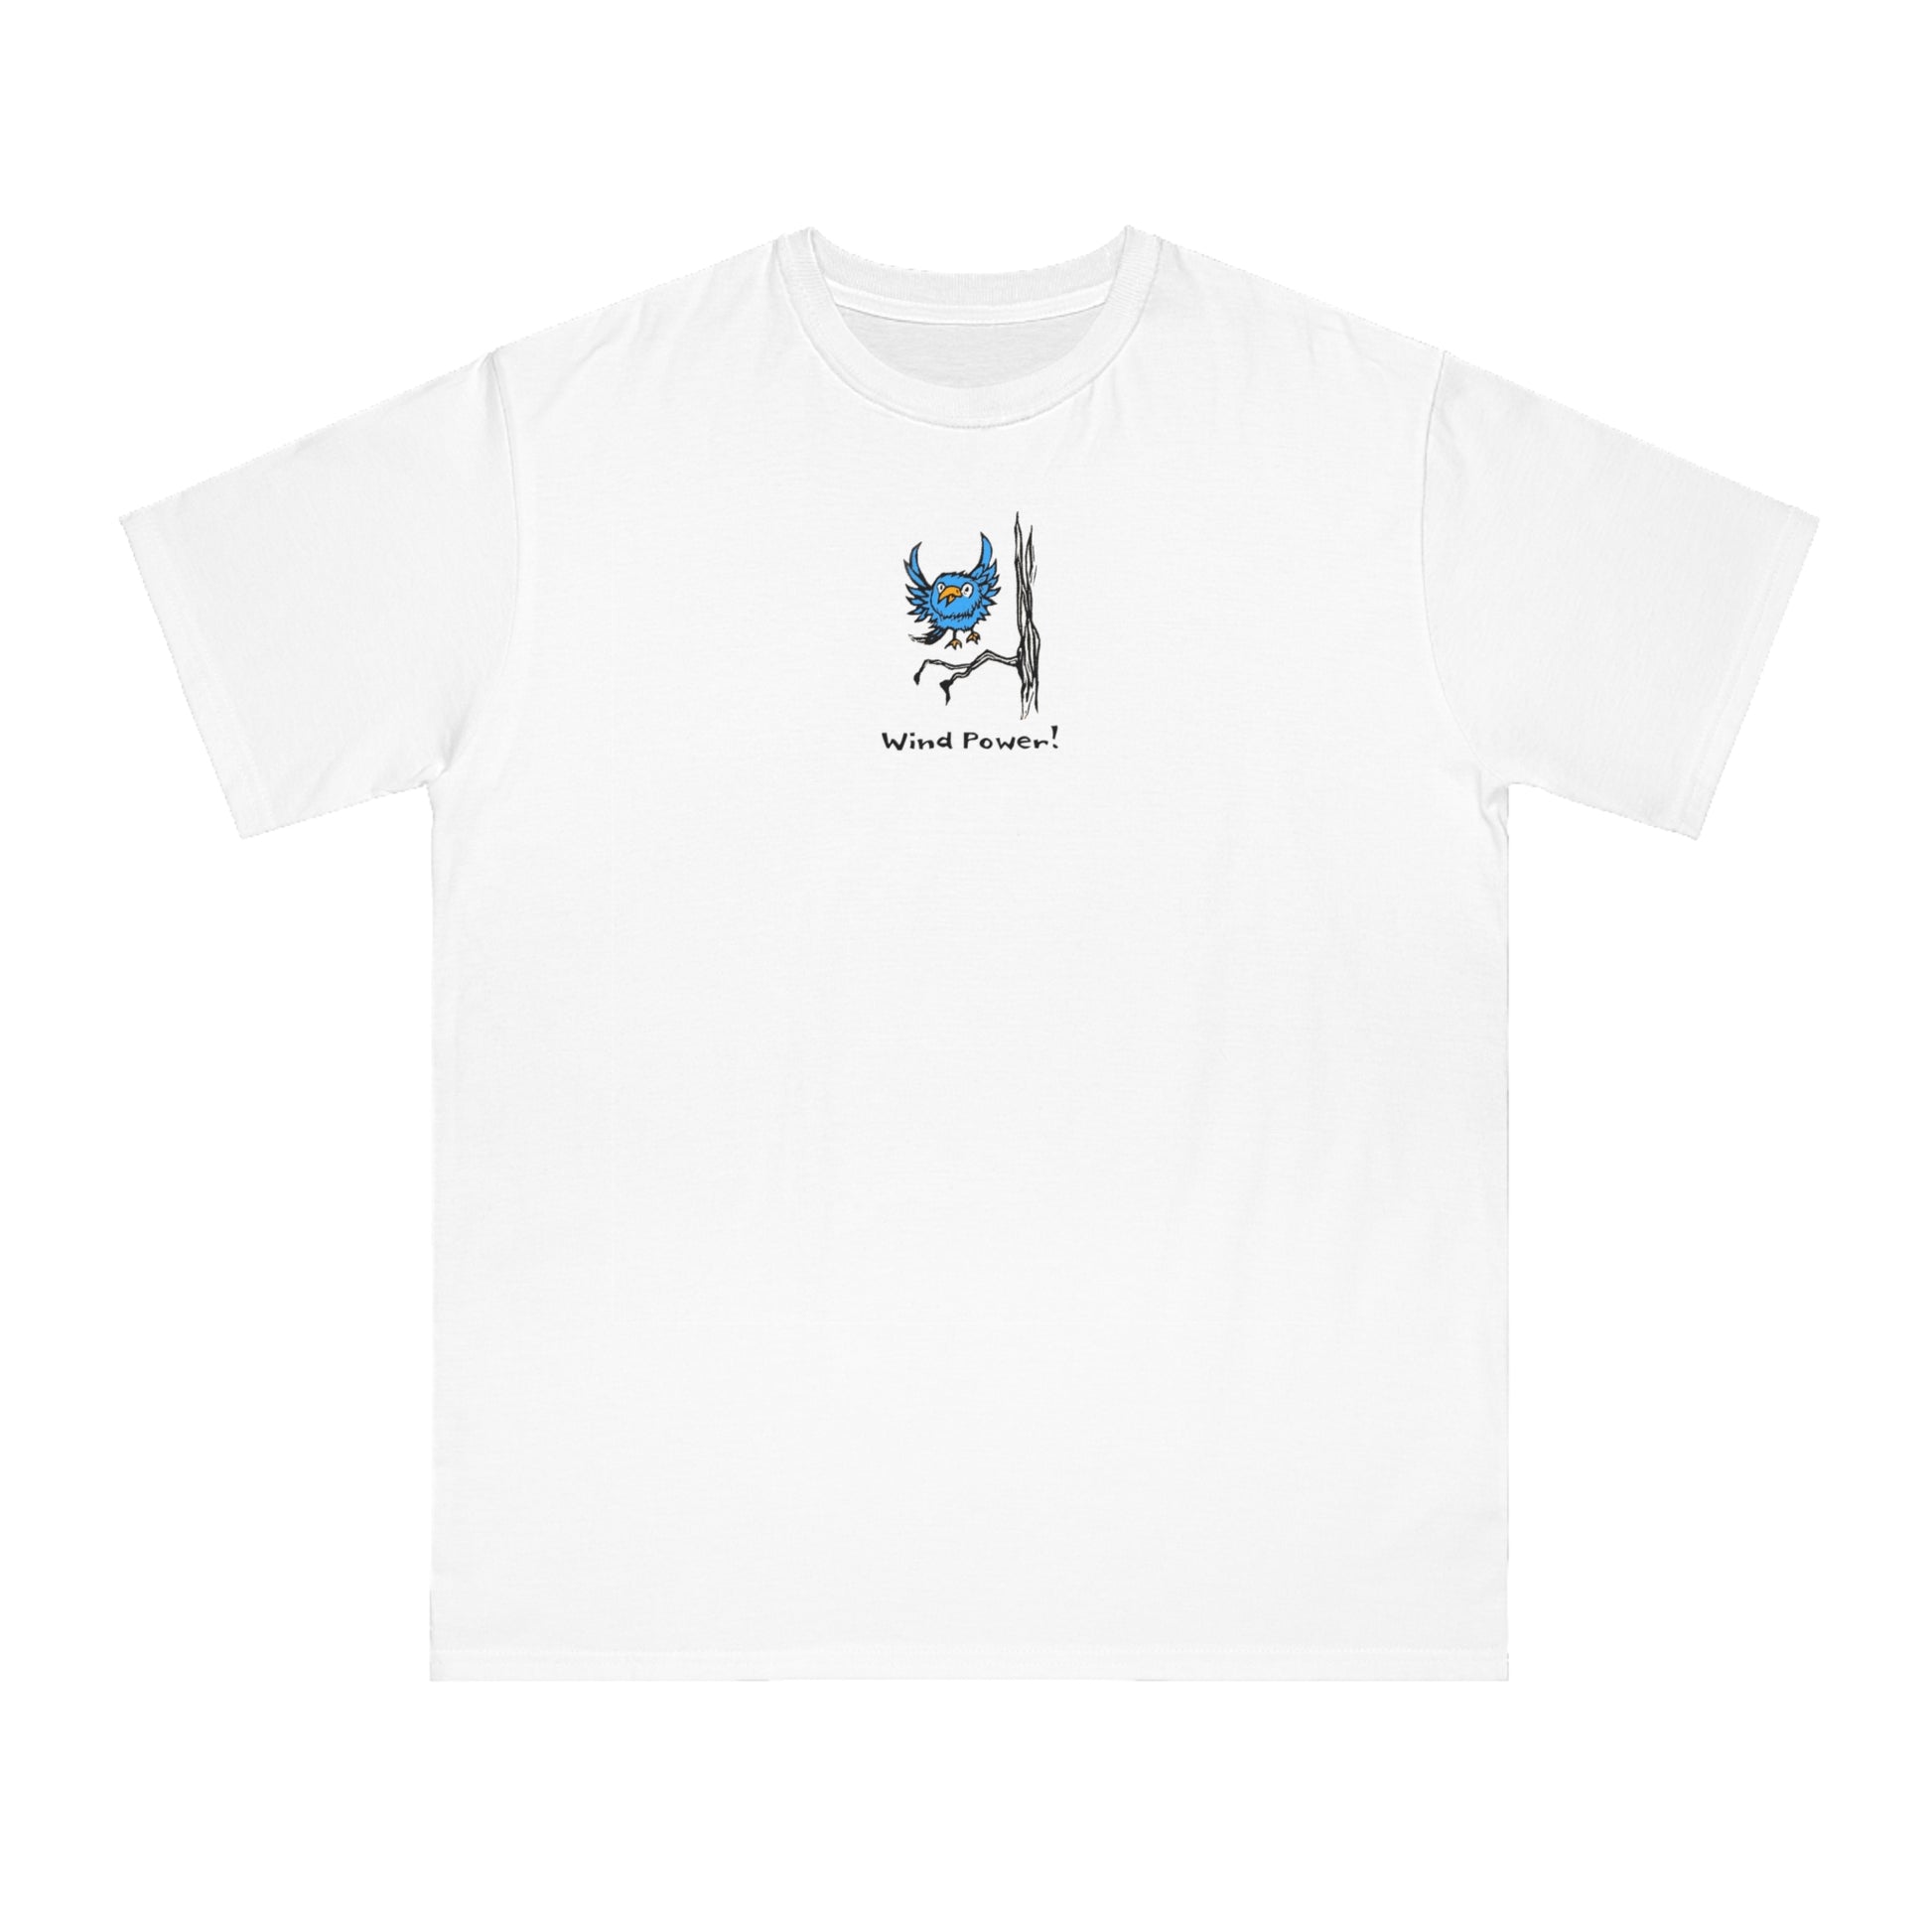 Blue bird with orange beak flying over branch on tree on white color unisex men's t-shirt. Text under it reads Wind Power